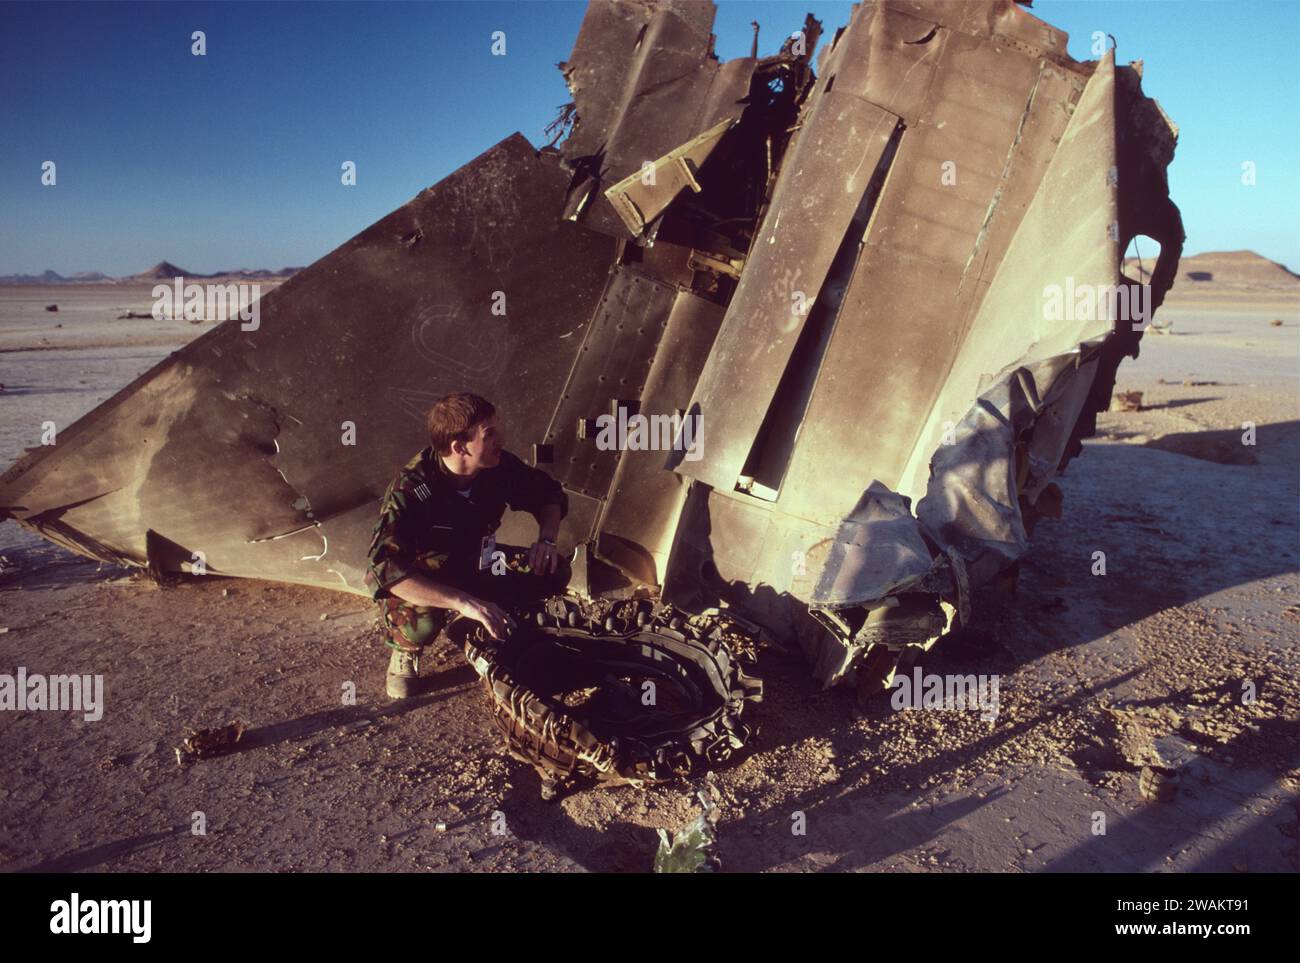 22nd Jan 1991 In the desert in north-west Saudi Arabia, a ground-crewman squats next to the wreckage of an RAF Tornado GR1. Stock Photo